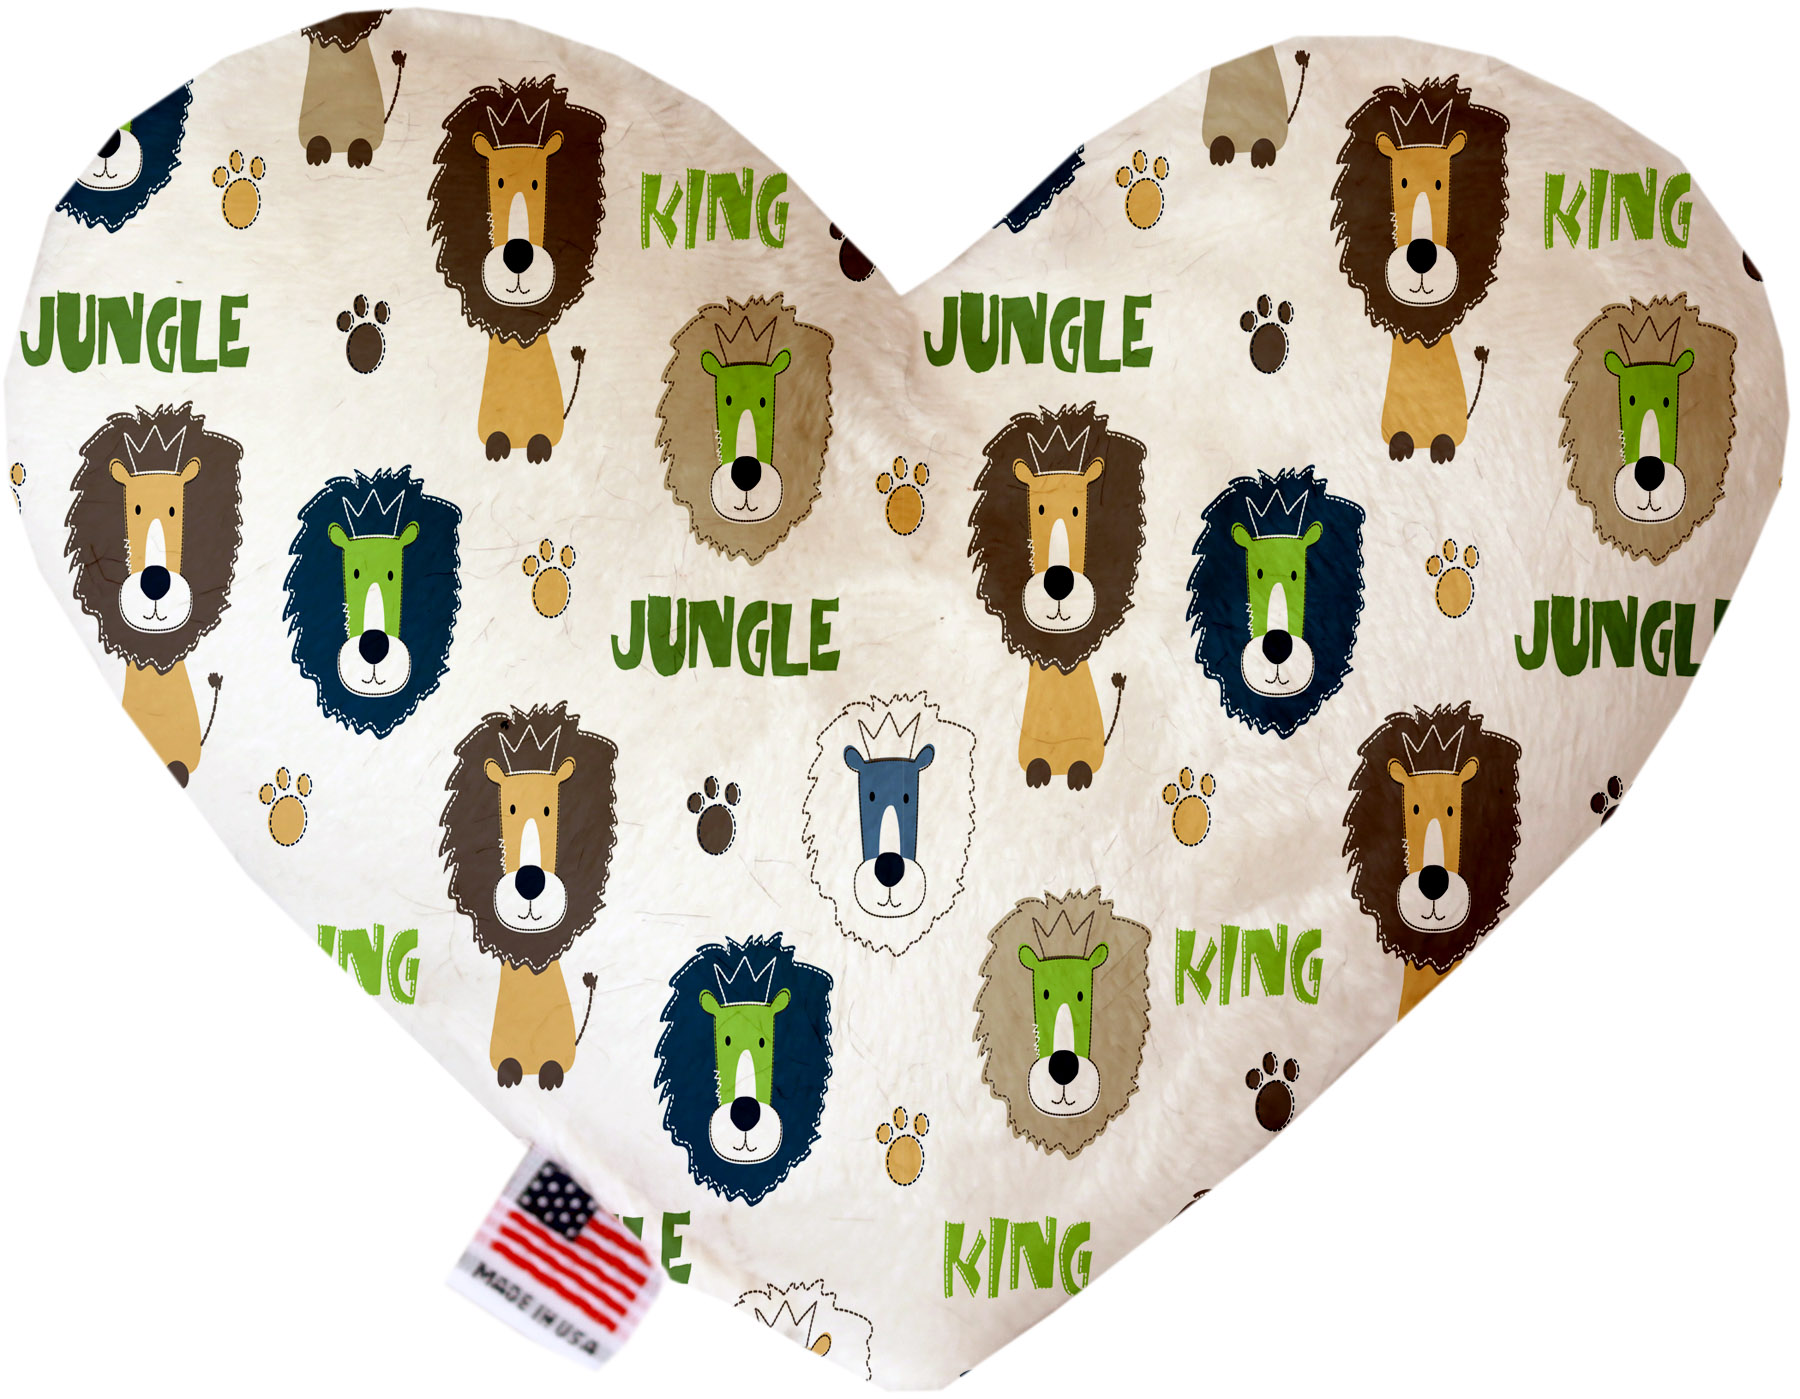 King of the Jungle 6 Inch Heart Dog Toy